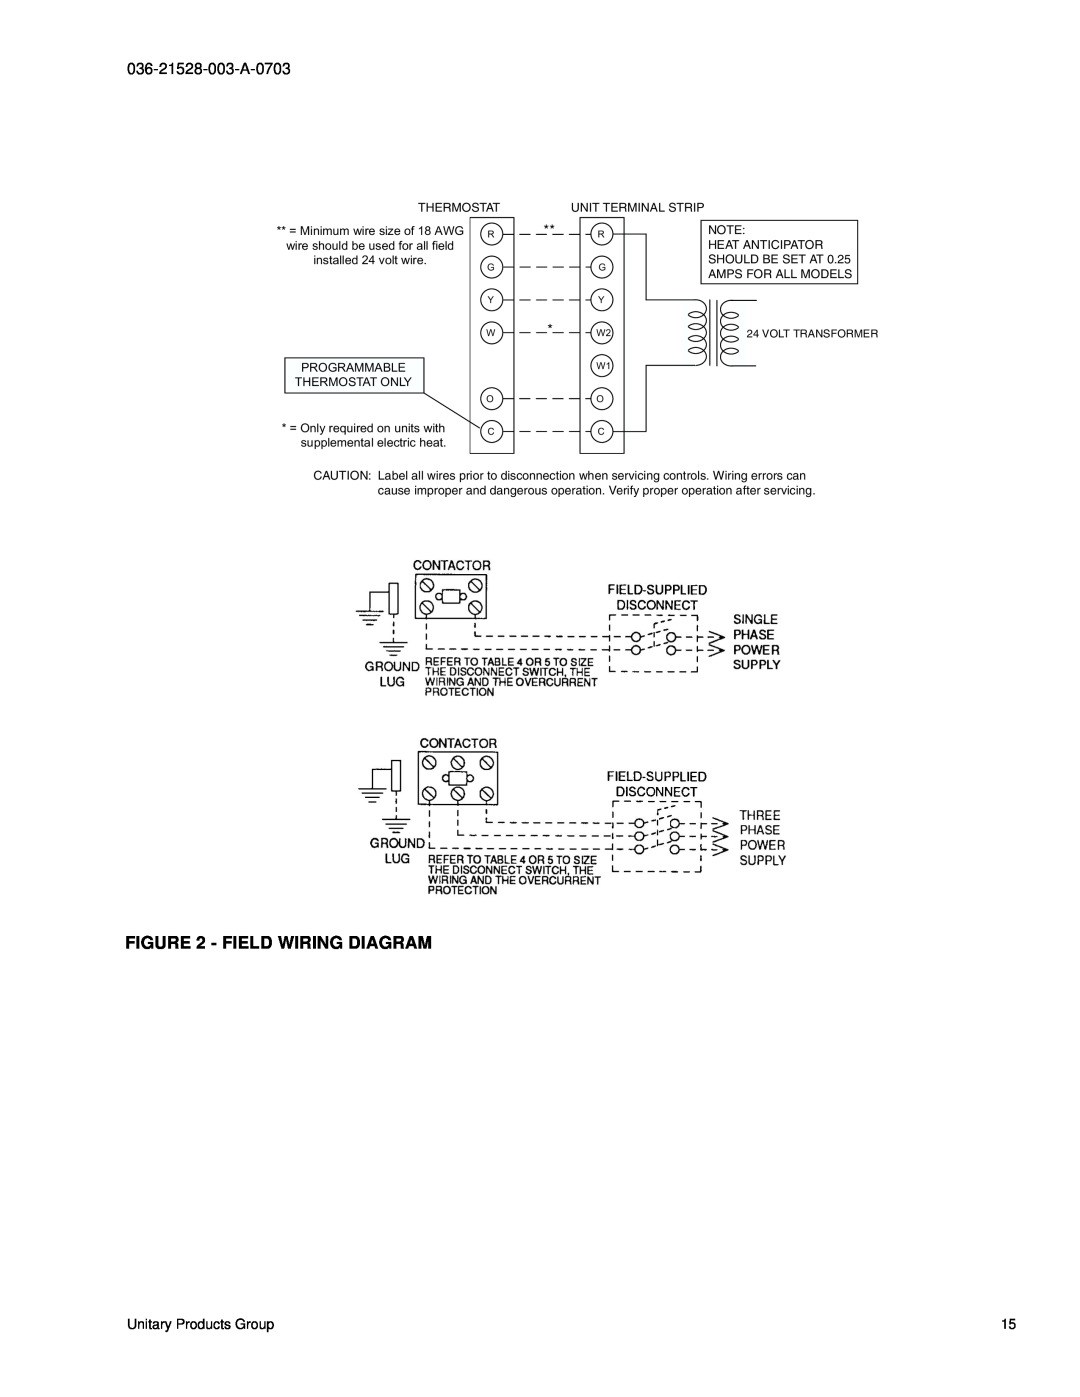 York BHP024 Field Wiring Diagram, = Minimum wire size of 18 AWG, Programmable, Thermostat Only, supplemental electric heat 